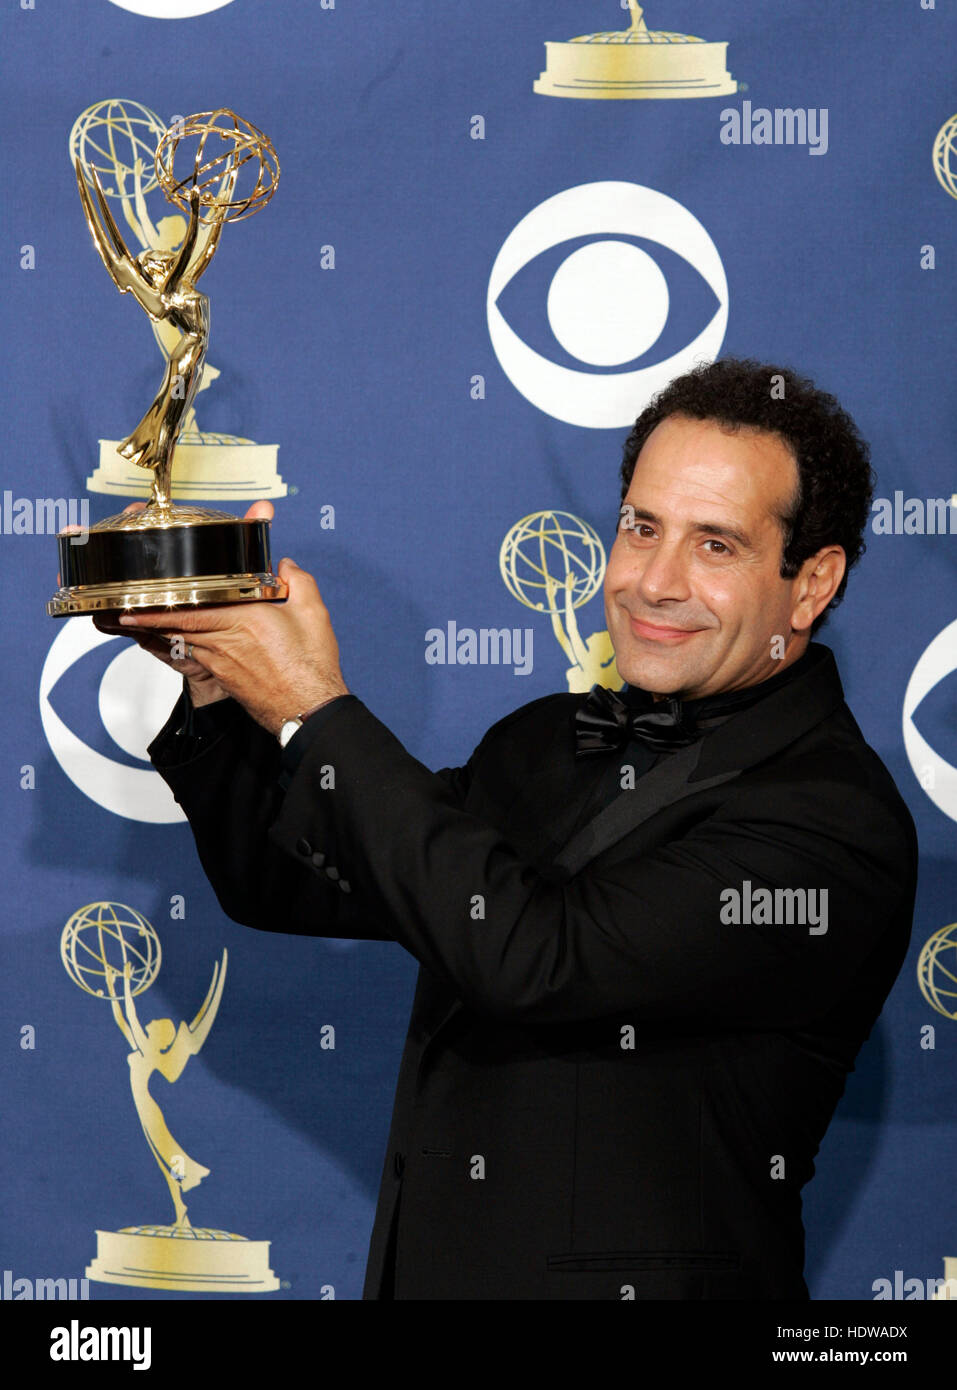 Tony Shalhoub at the 57th Annual Emmy Awards at the Shrine Auditorium in Los Angeles, September 18, 2005. Photo credit: Francis Specker Stock Photo